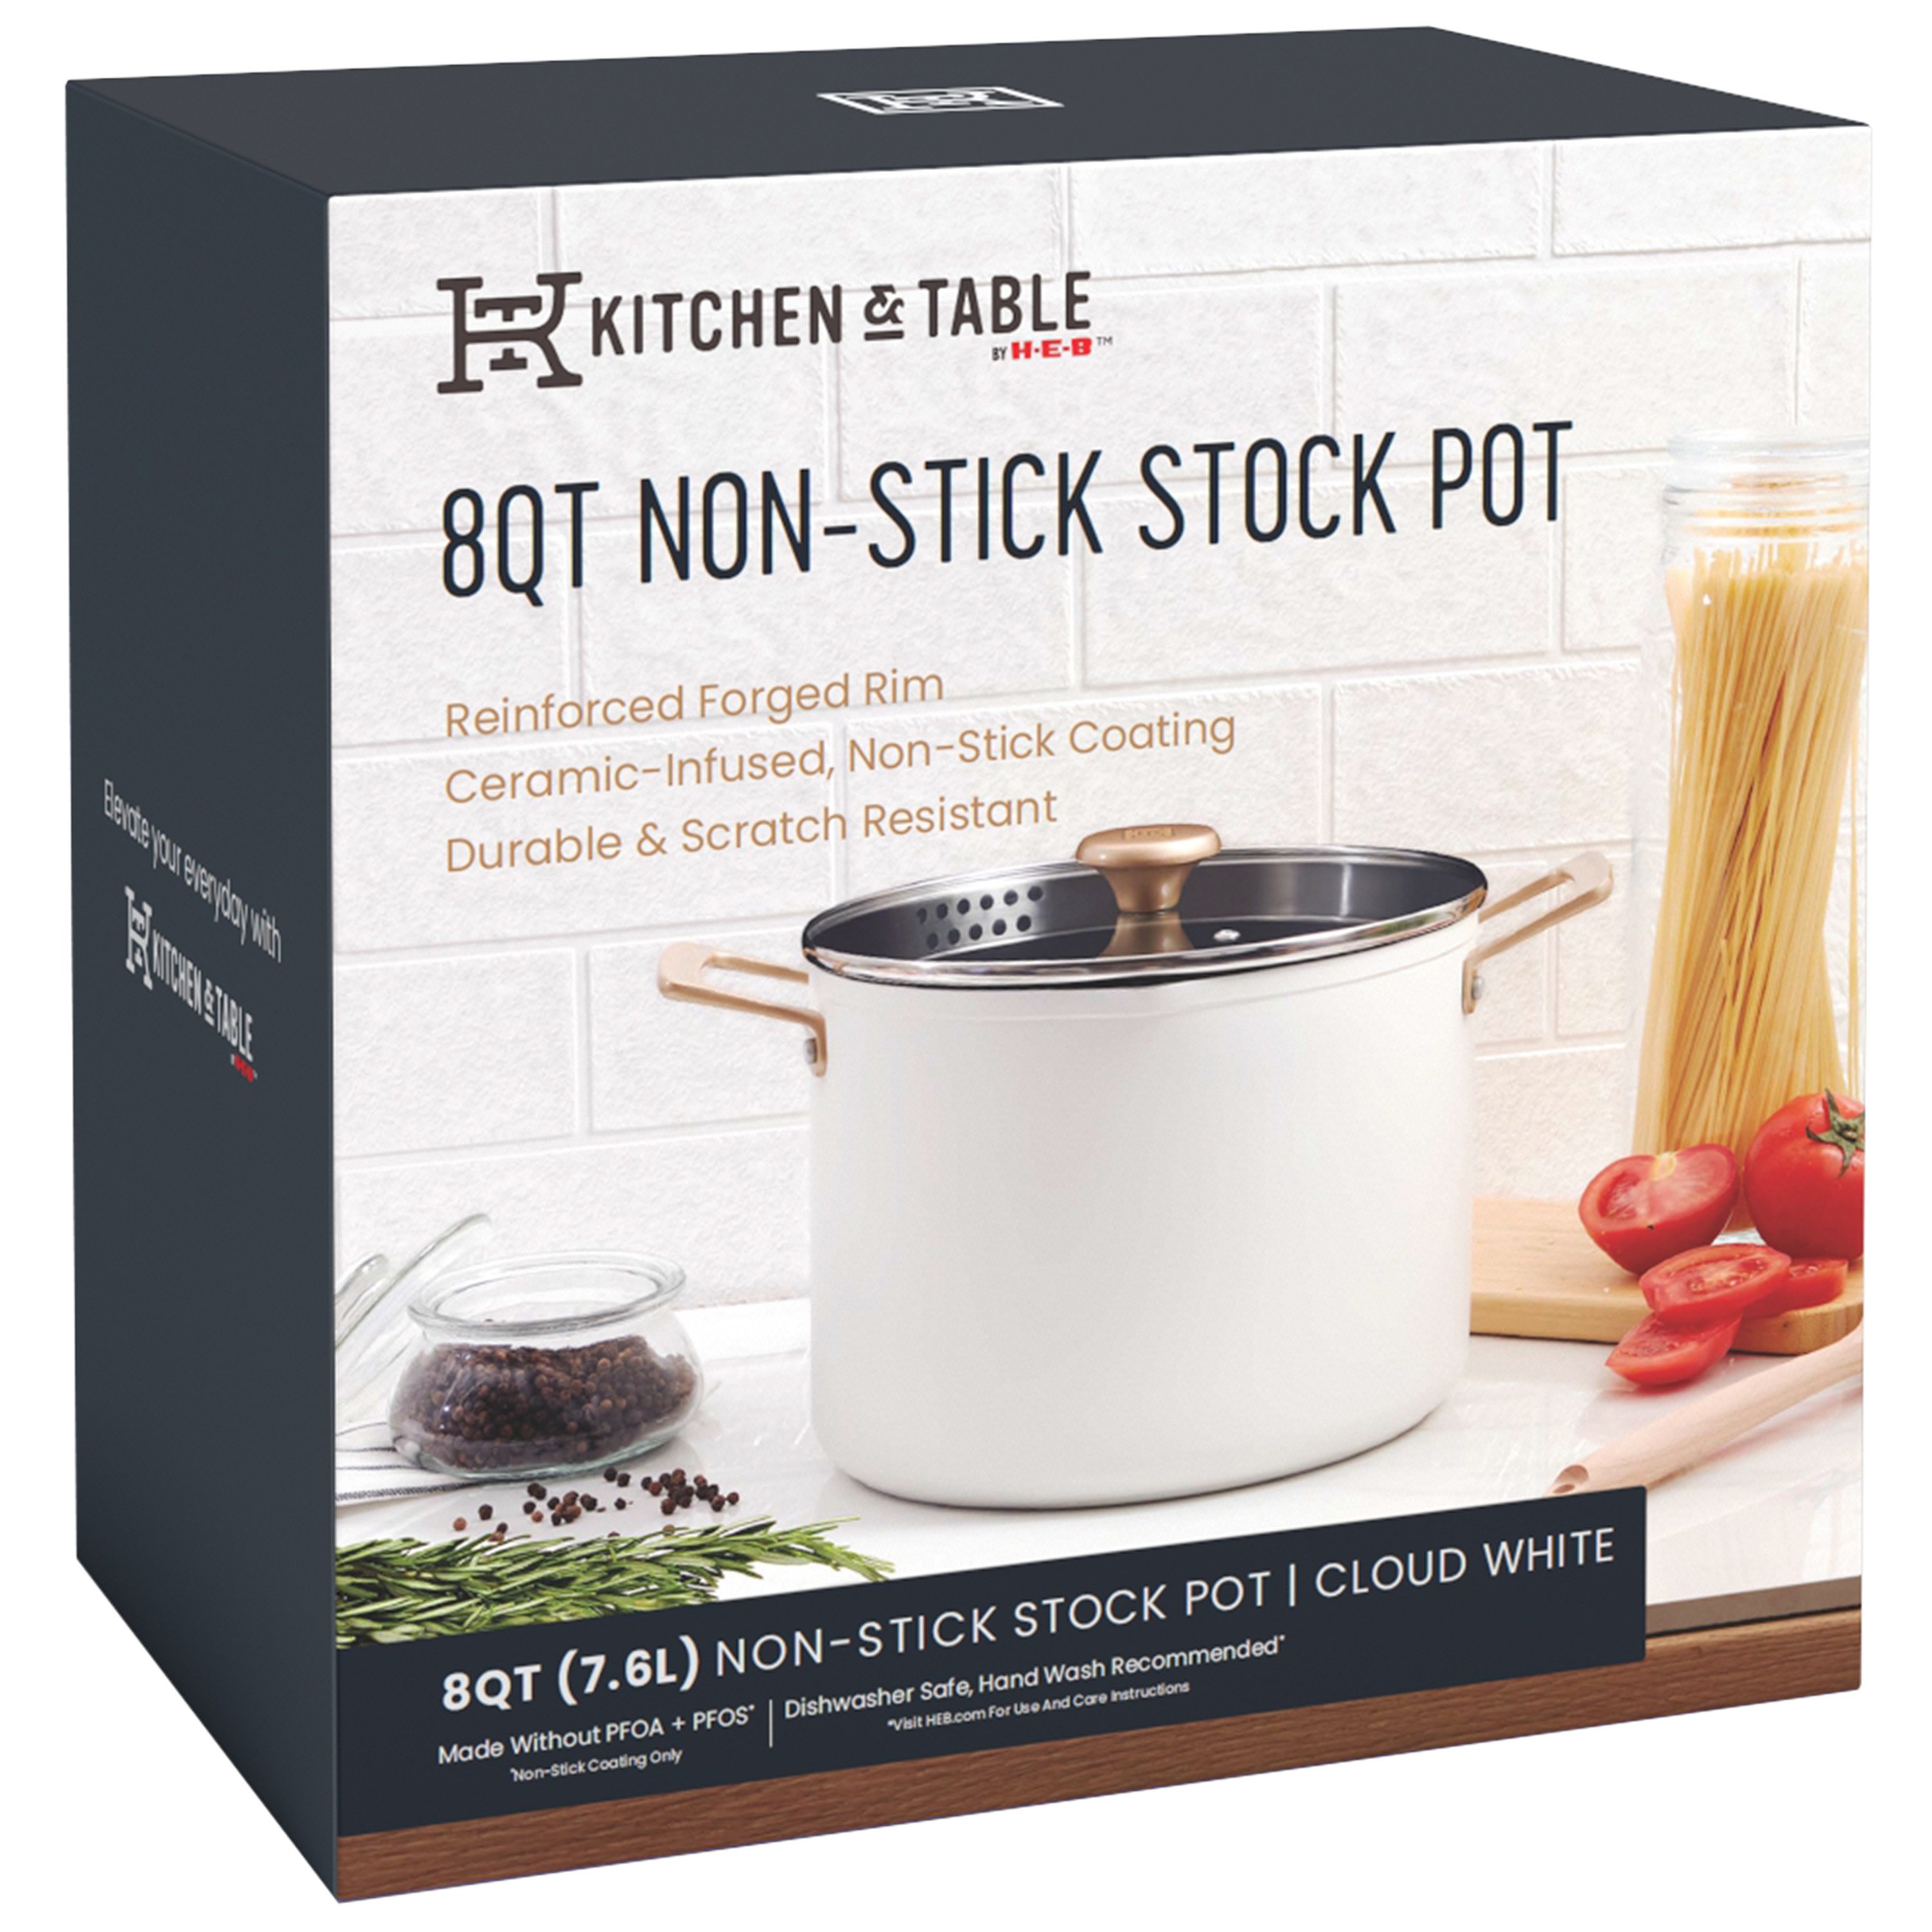 Cooking in a Stock Pot, The Stock Pot Guide